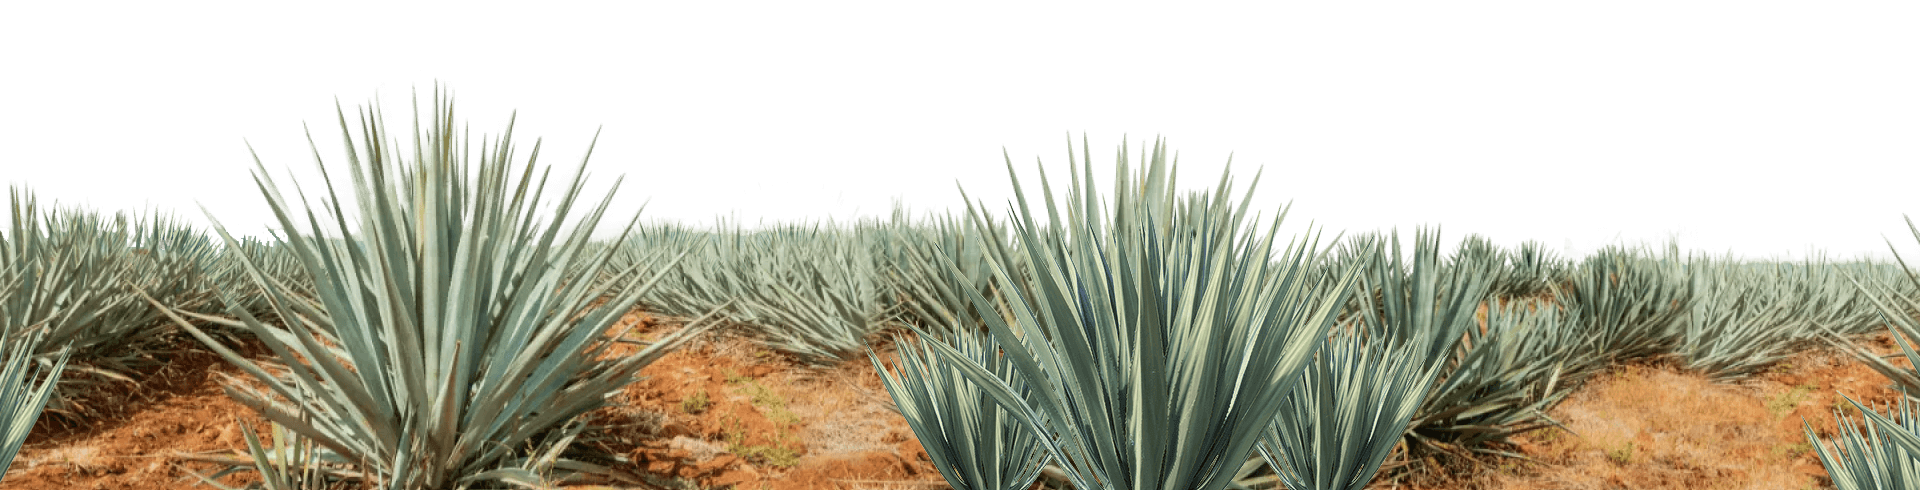 Picture of agave plants in the desert